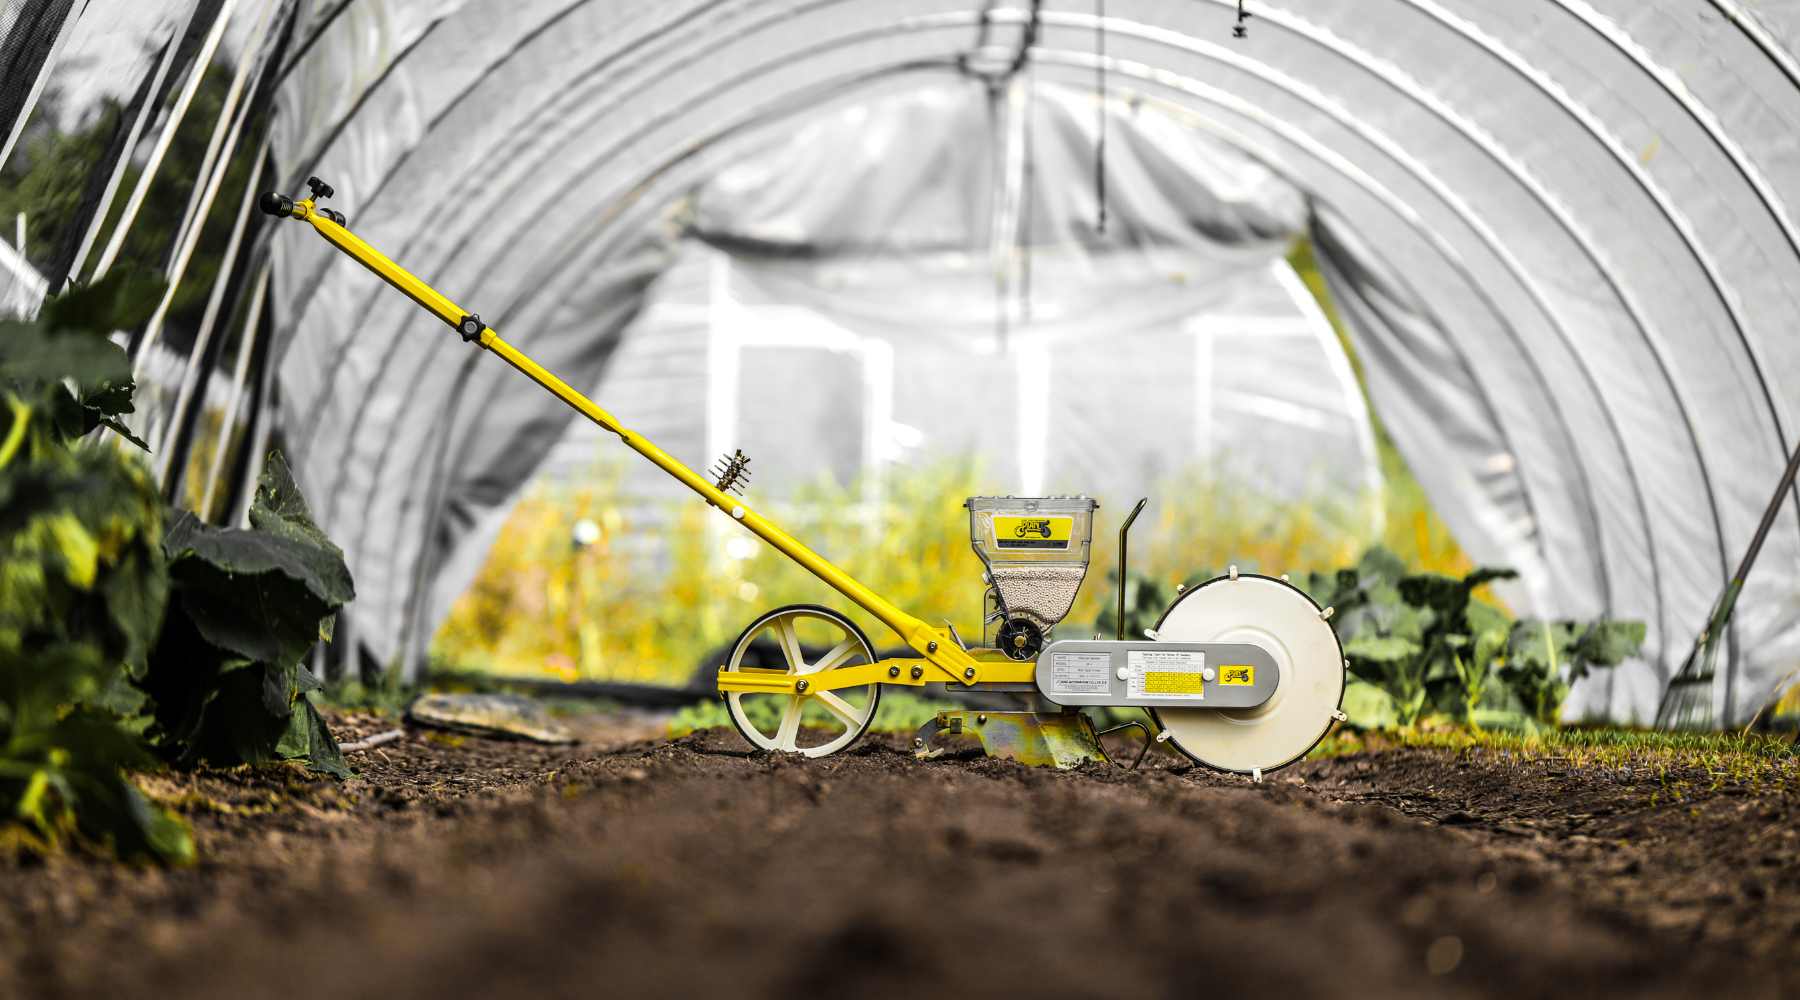 A JP-1 Jang seeder inside a caterpillar tunnel set up to seed rows of lettuce. 